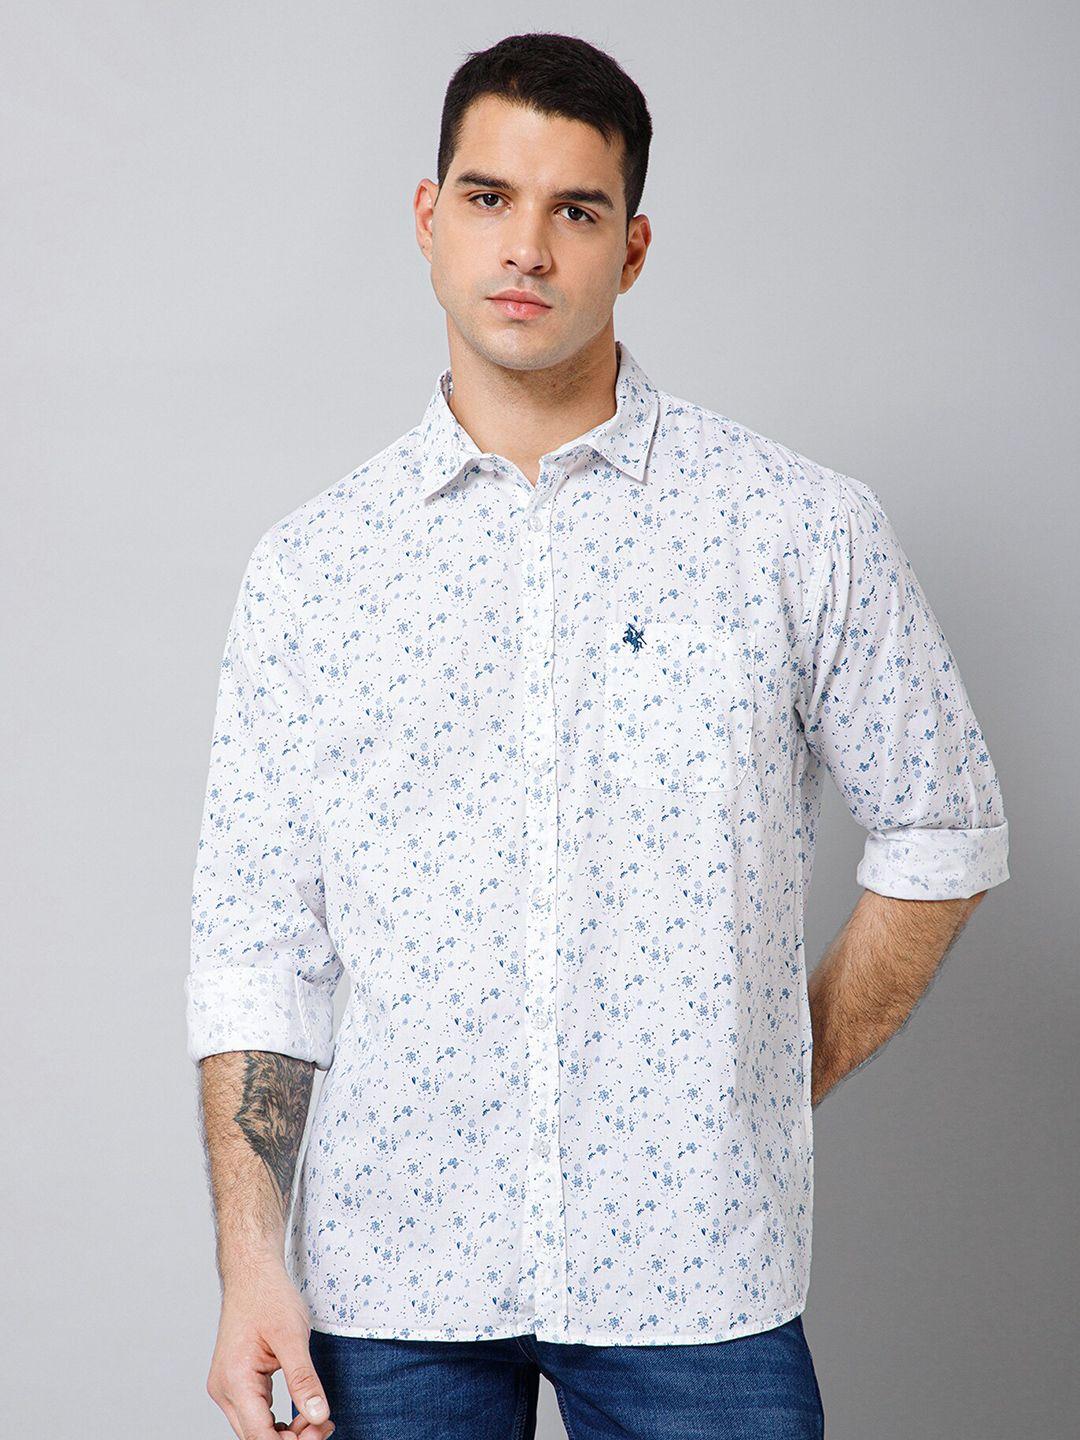 cantabil floral printed comfort cotton casual shirt